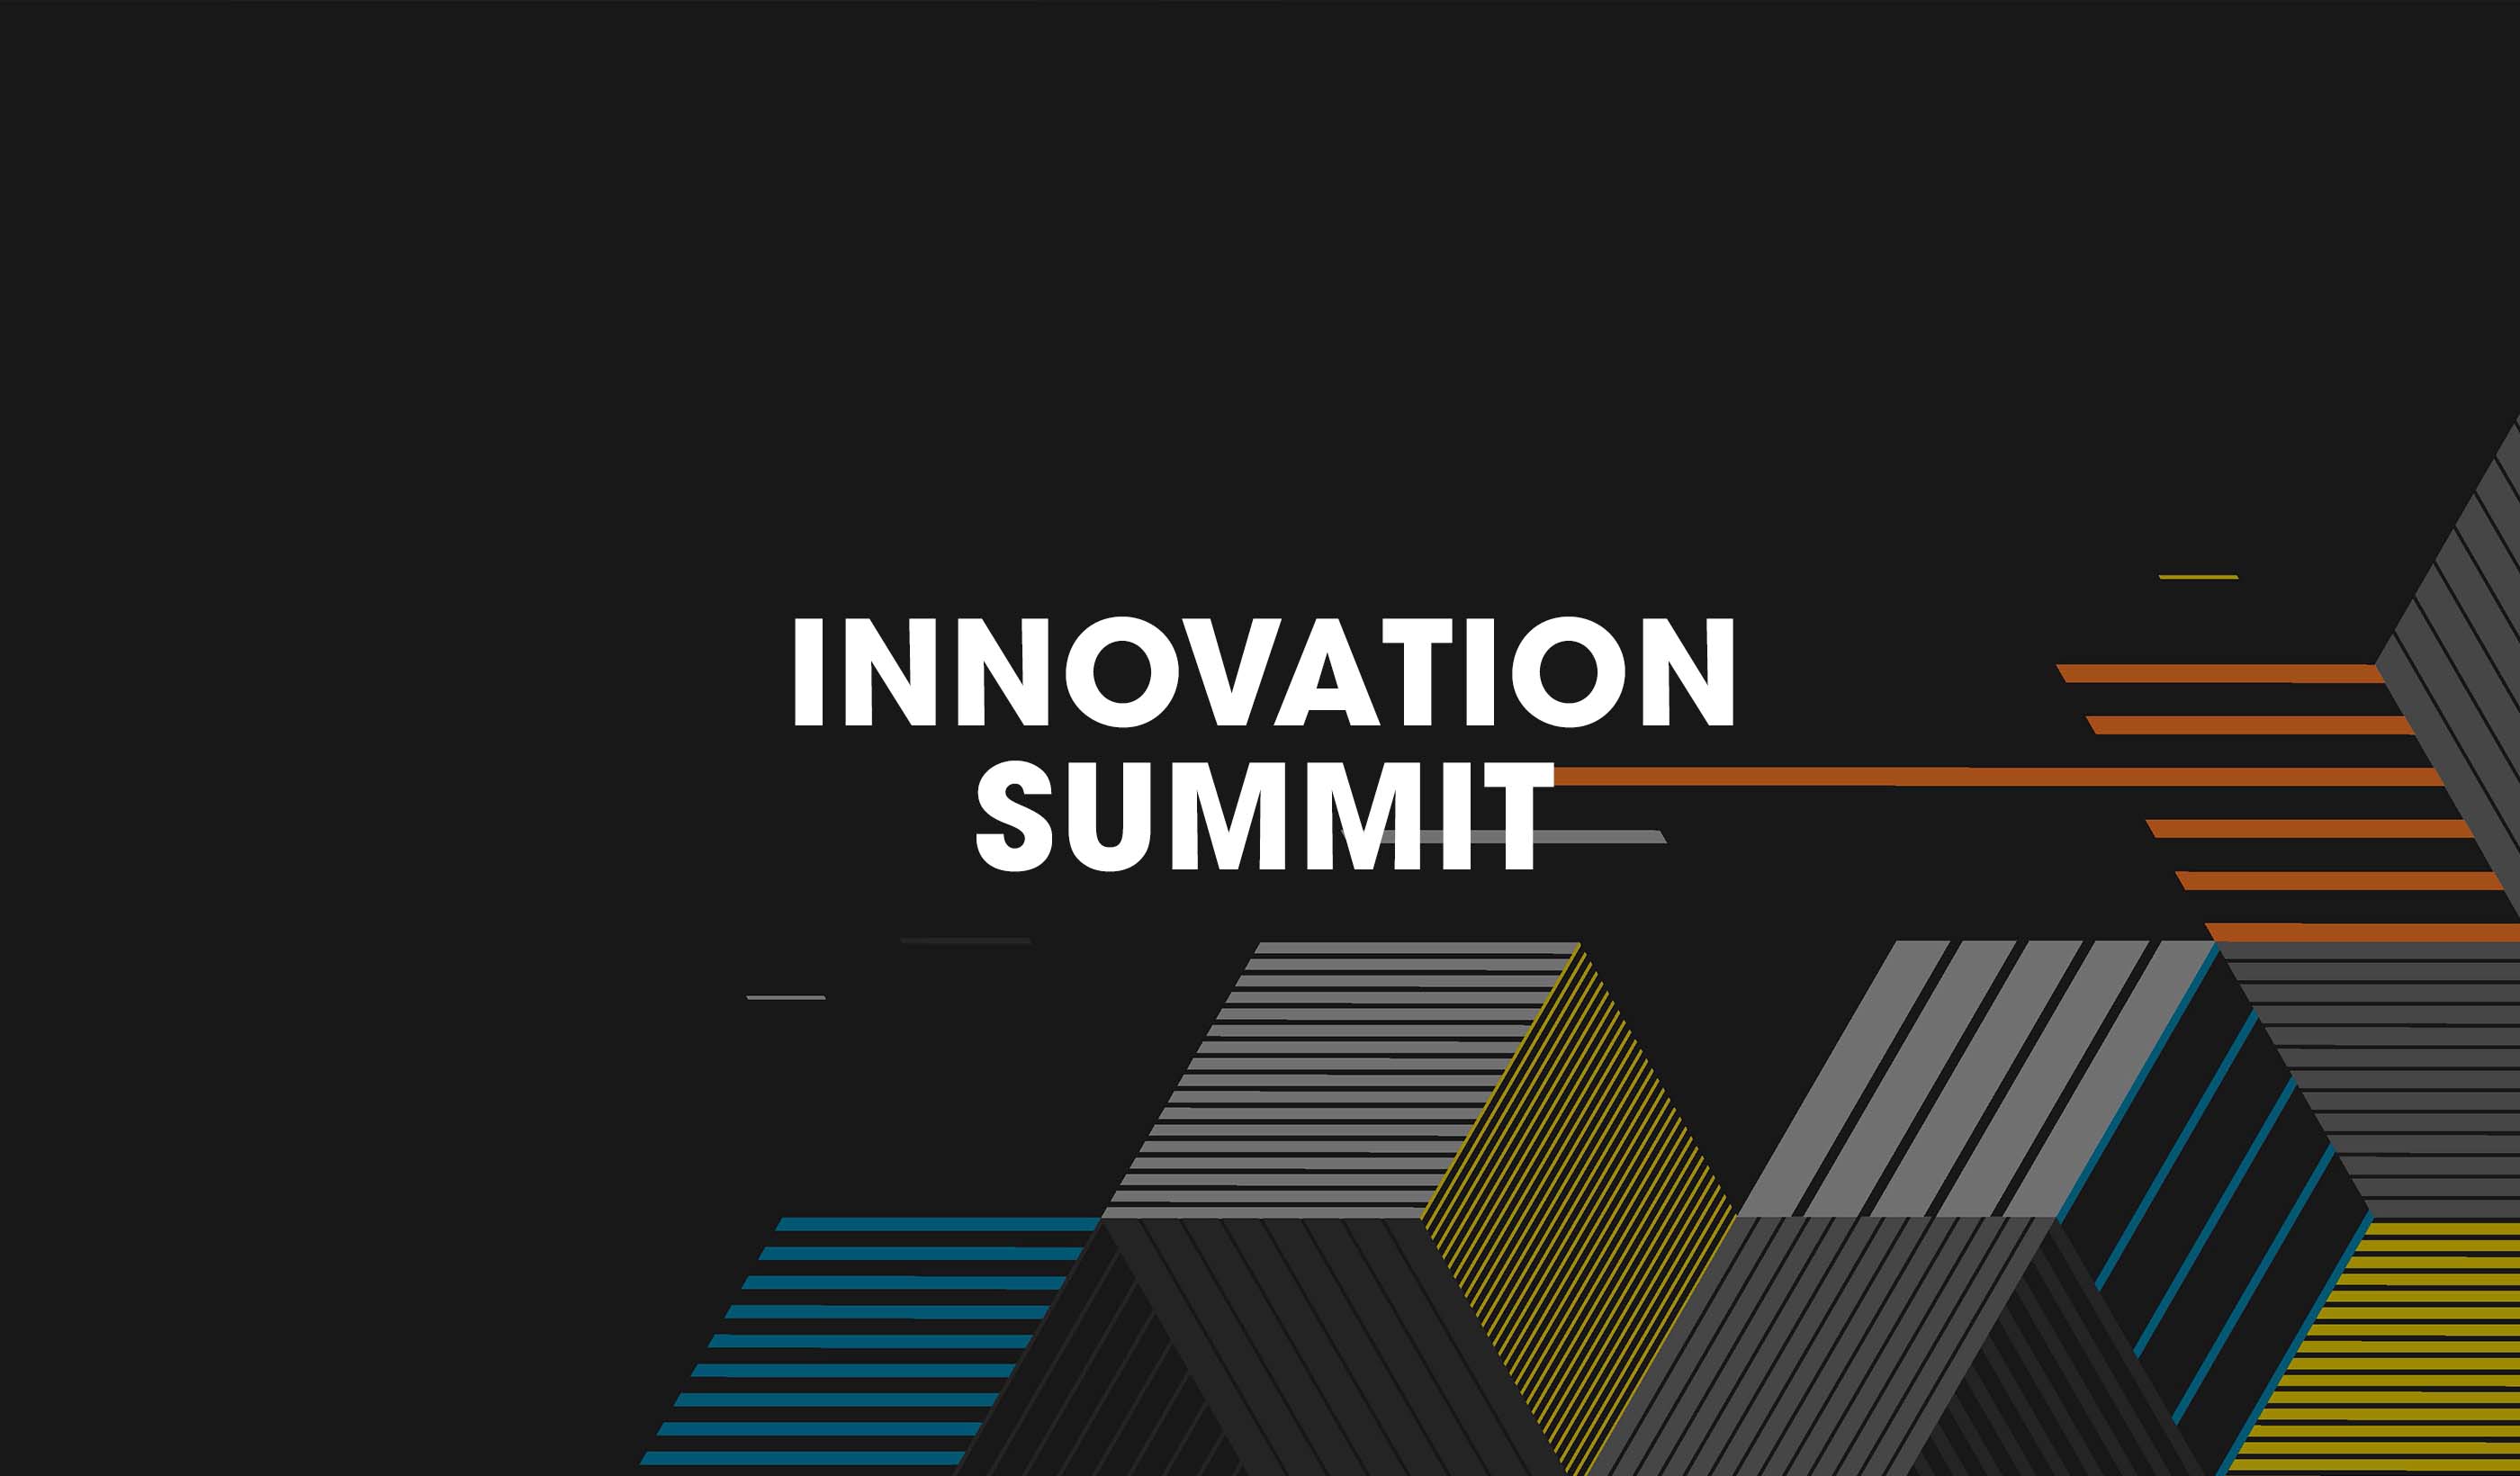 Introducing Stantec’s 2021 Innovation Summit